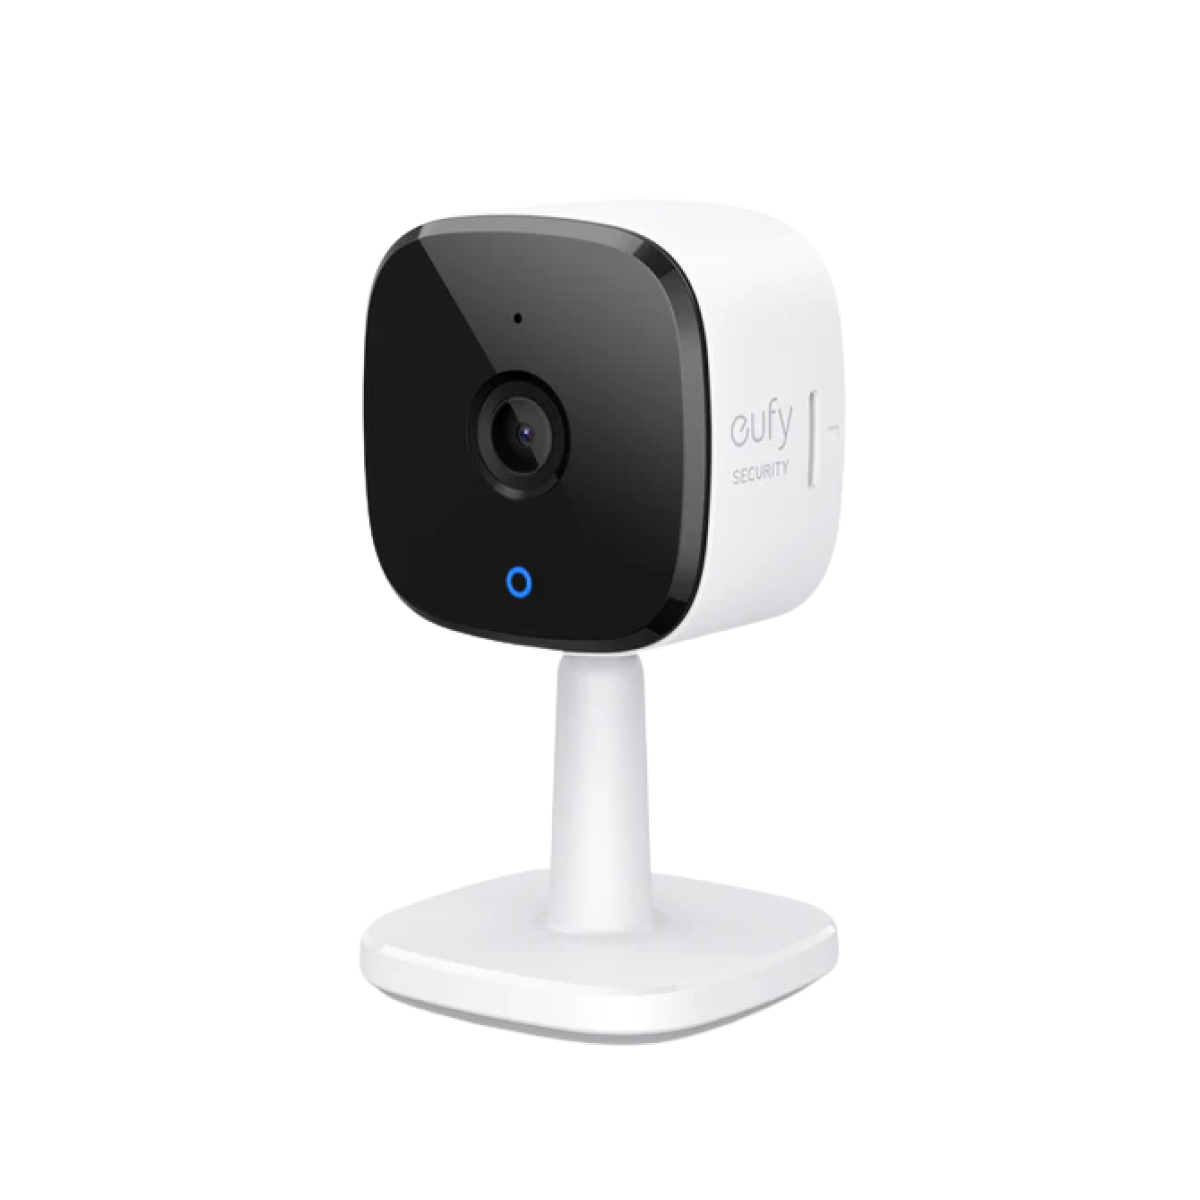 Eufy By Anker Innovations eufyCam - T88011D1 Security Camera Price